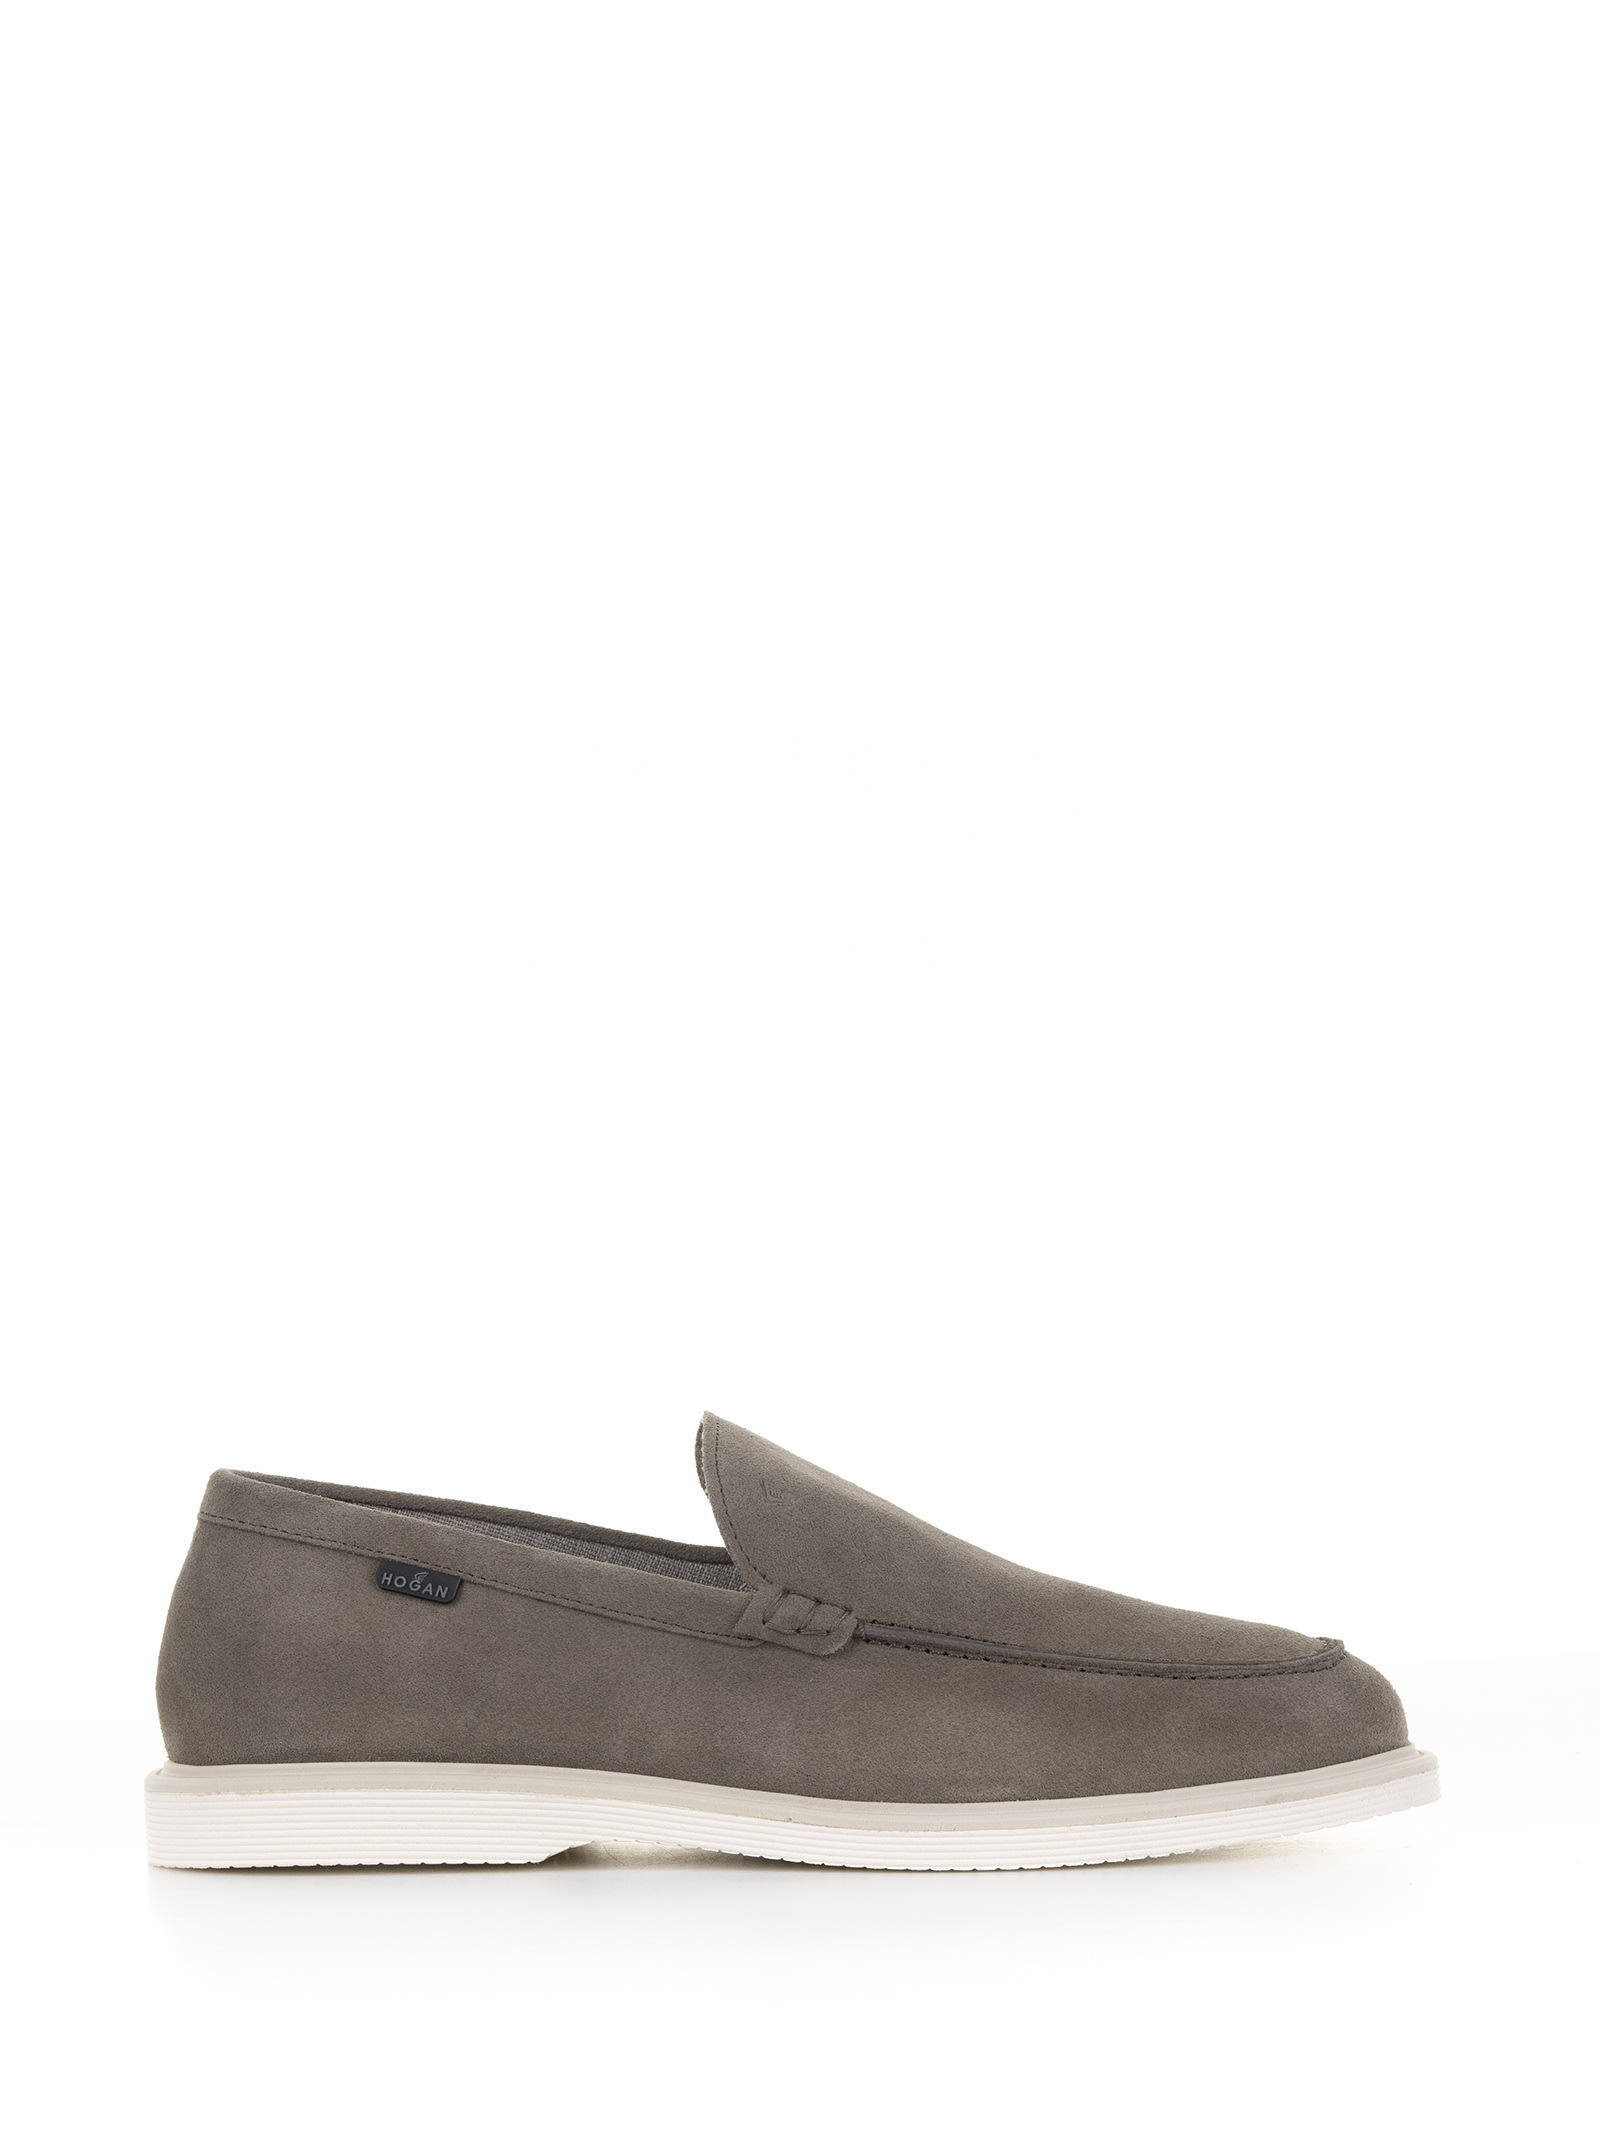 Hogan H616 Suede Loafer In Palude